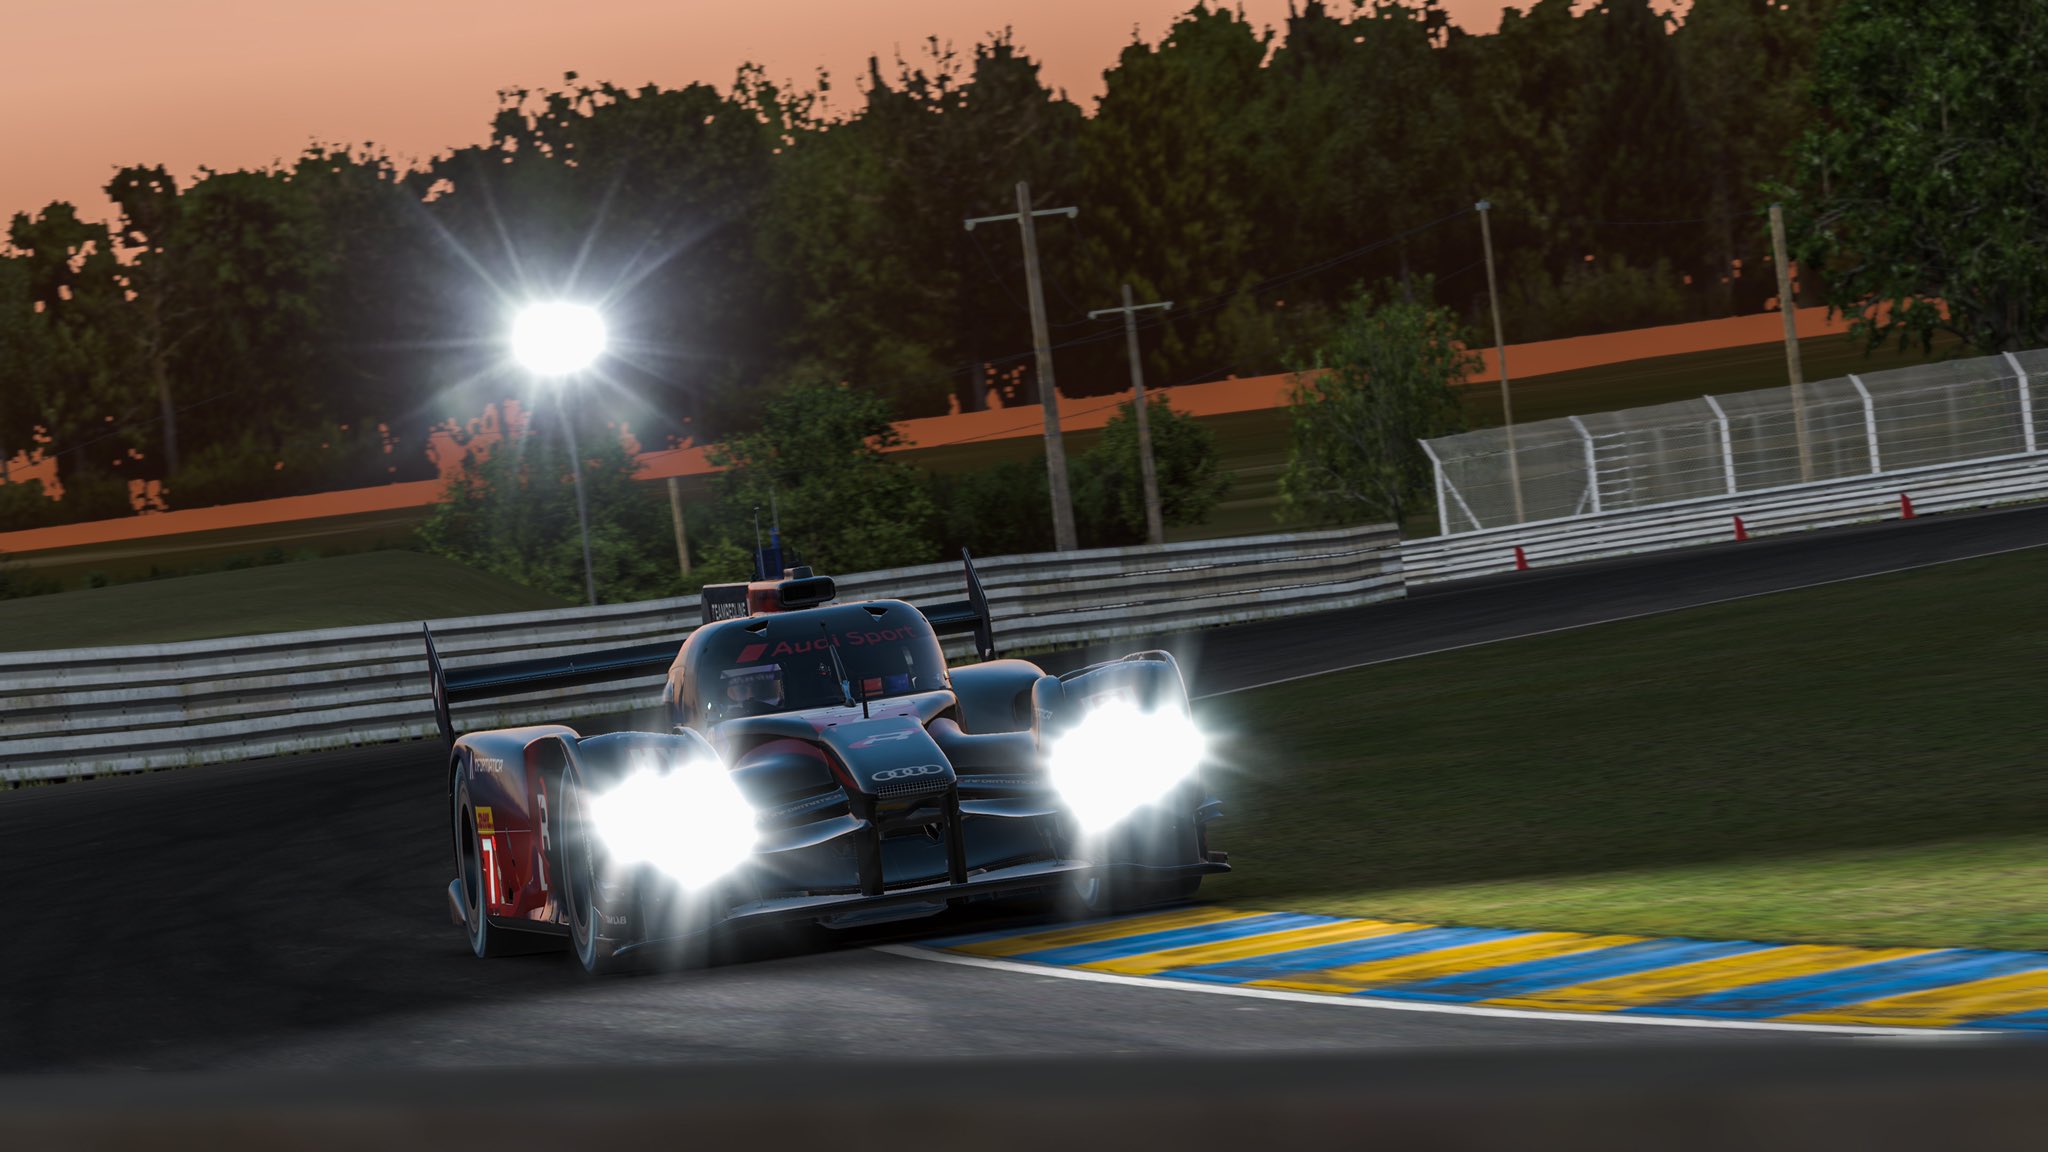 iRacing Le Mans 24 Hours: Team Redline win by narrow margin